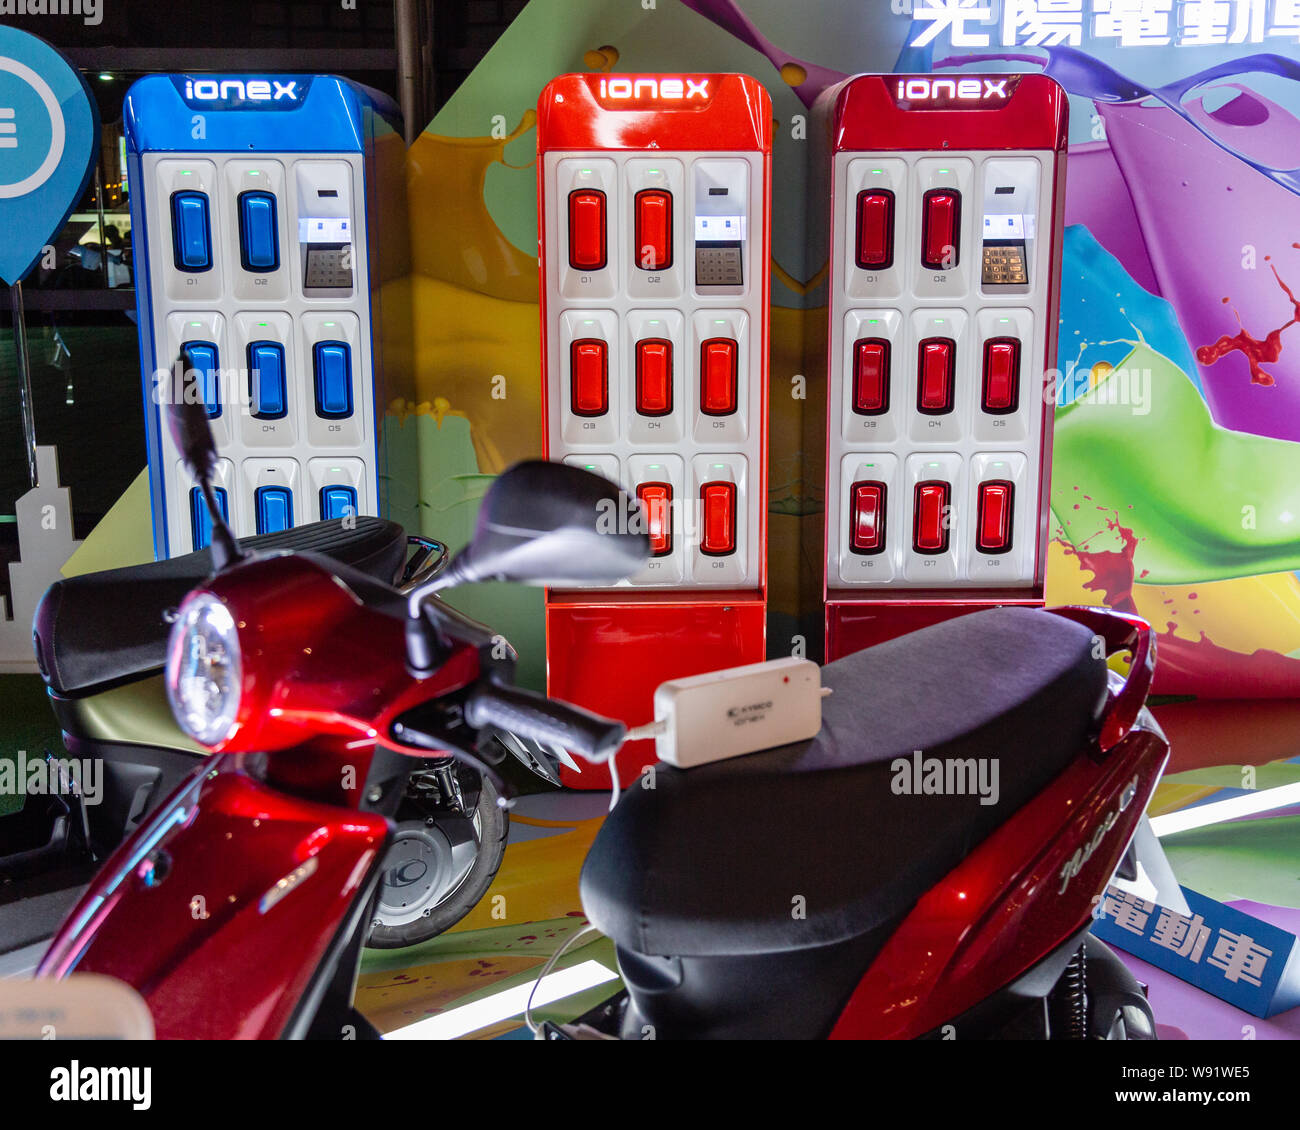 Taichung, Taiwan - August 4, 2019: Kymco IoneX battery-powered electric scooter display with batteries and charging stations. Alternative energy conce Stock Photo